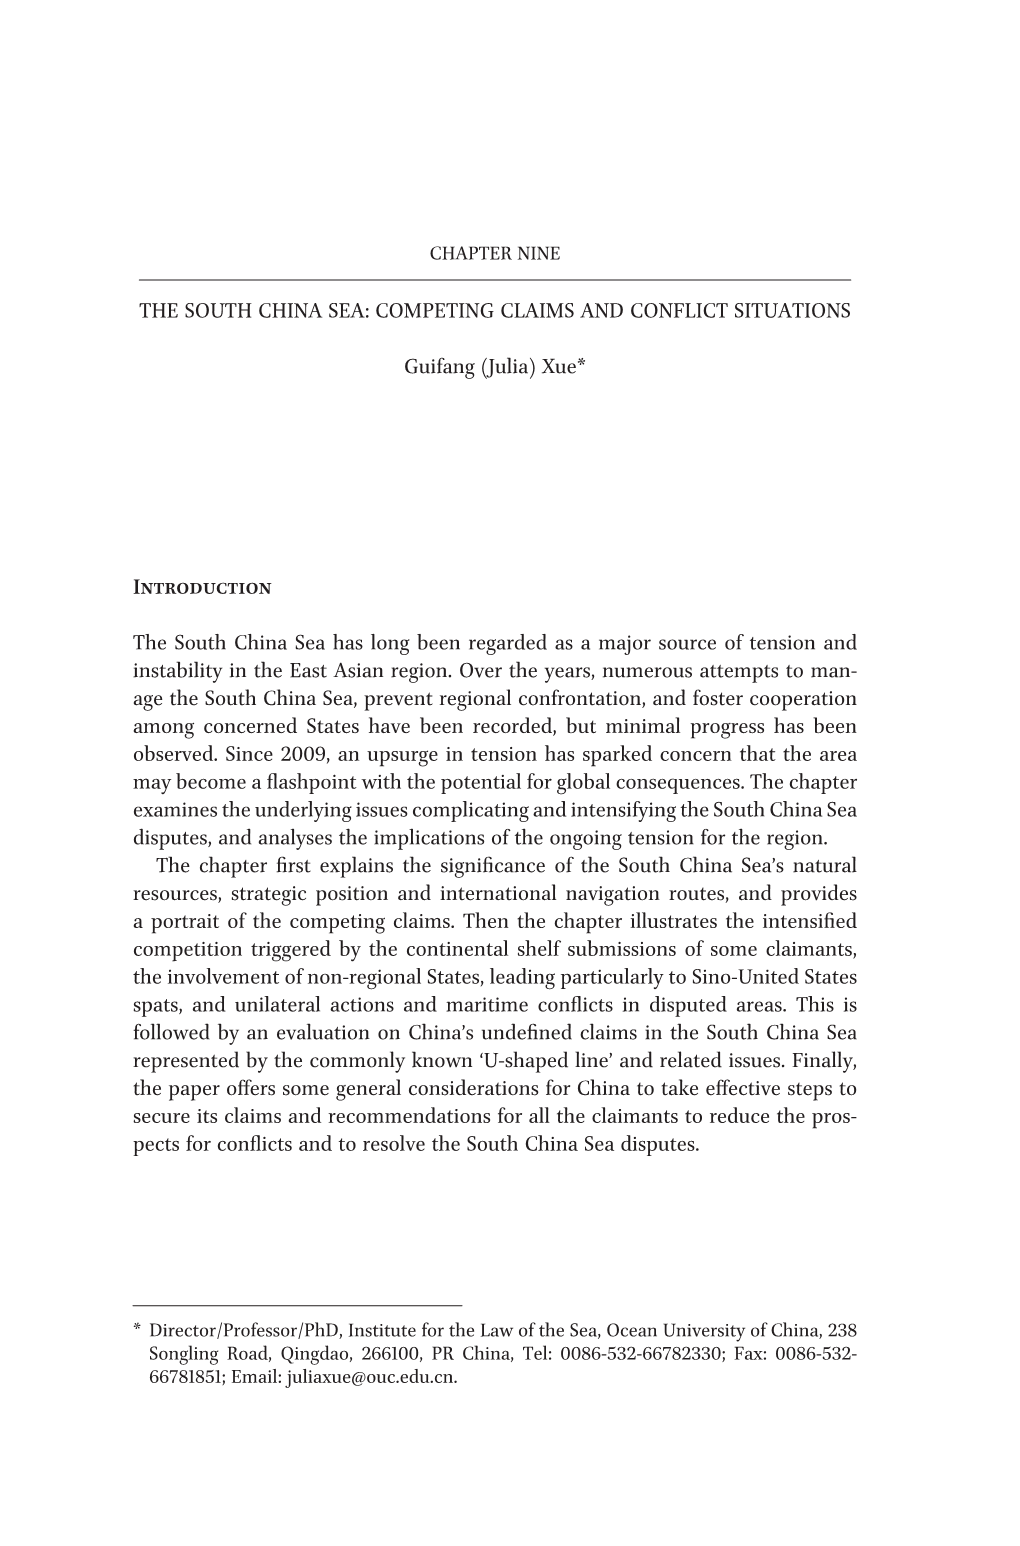 The South China Sea: Competing Claims and Conflict Situations